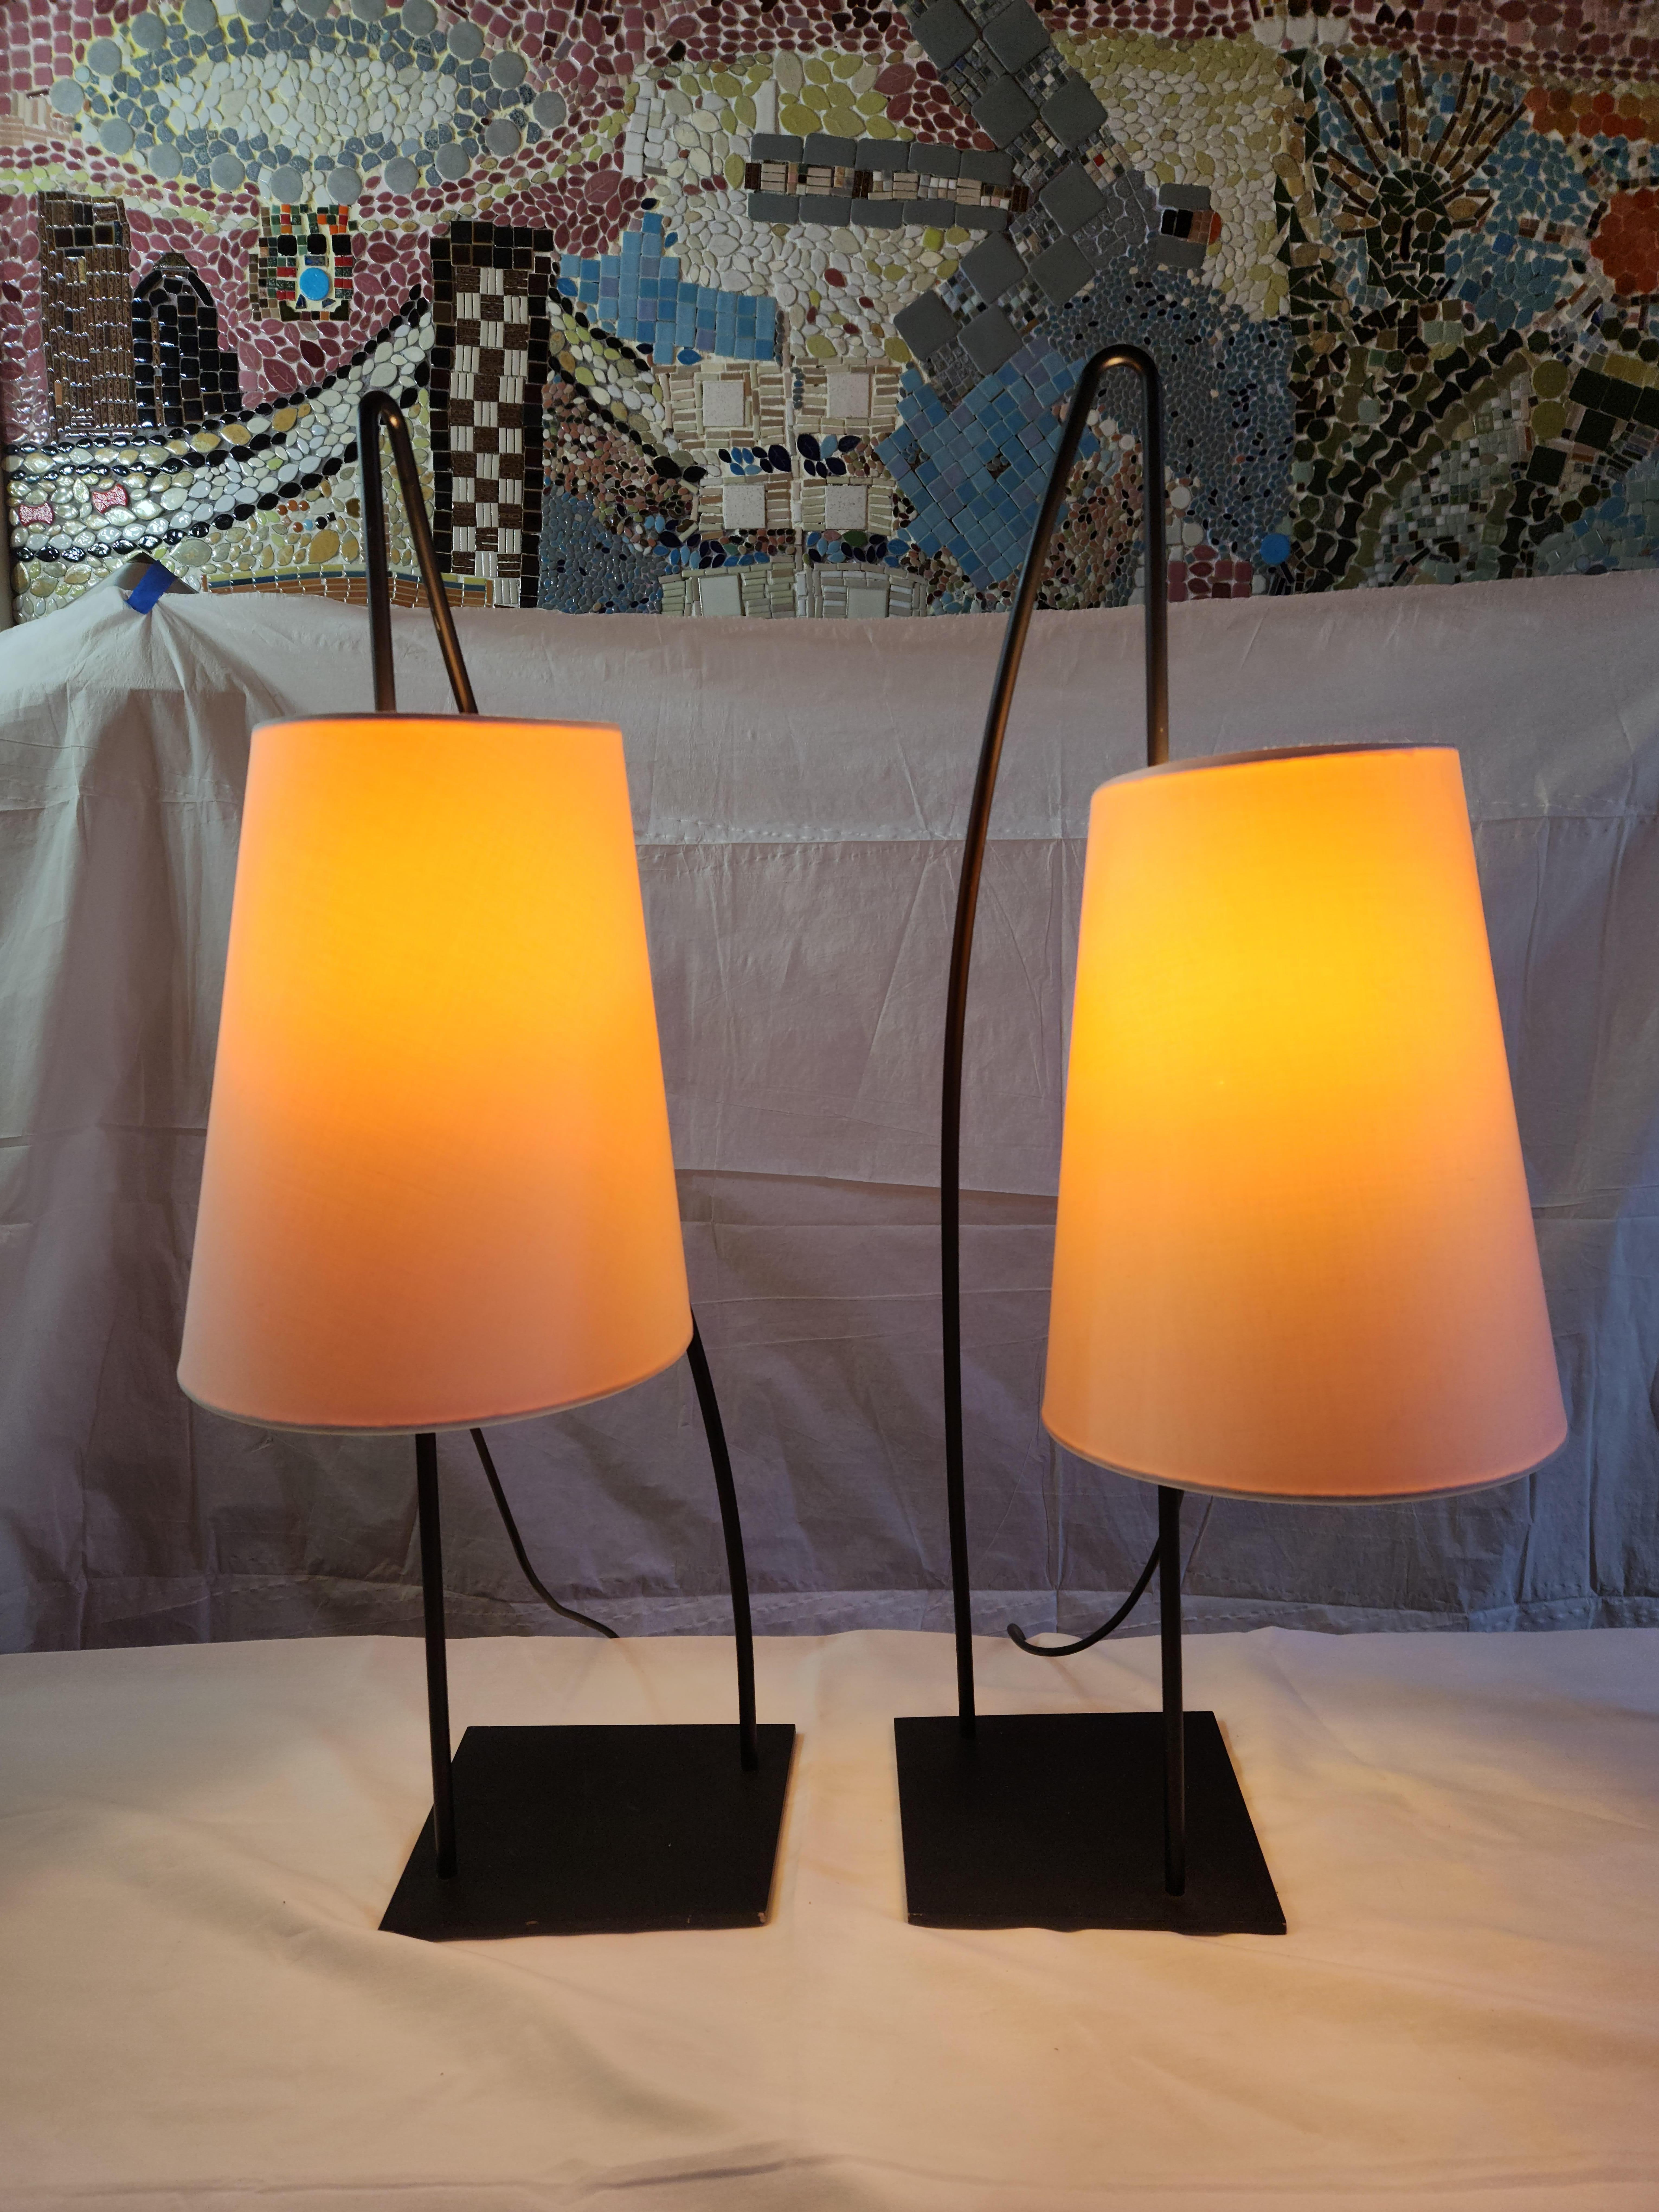 Lacquered Pair of Italiana Luce Black Rod Table Lamp, Italy, 1980s For Sale